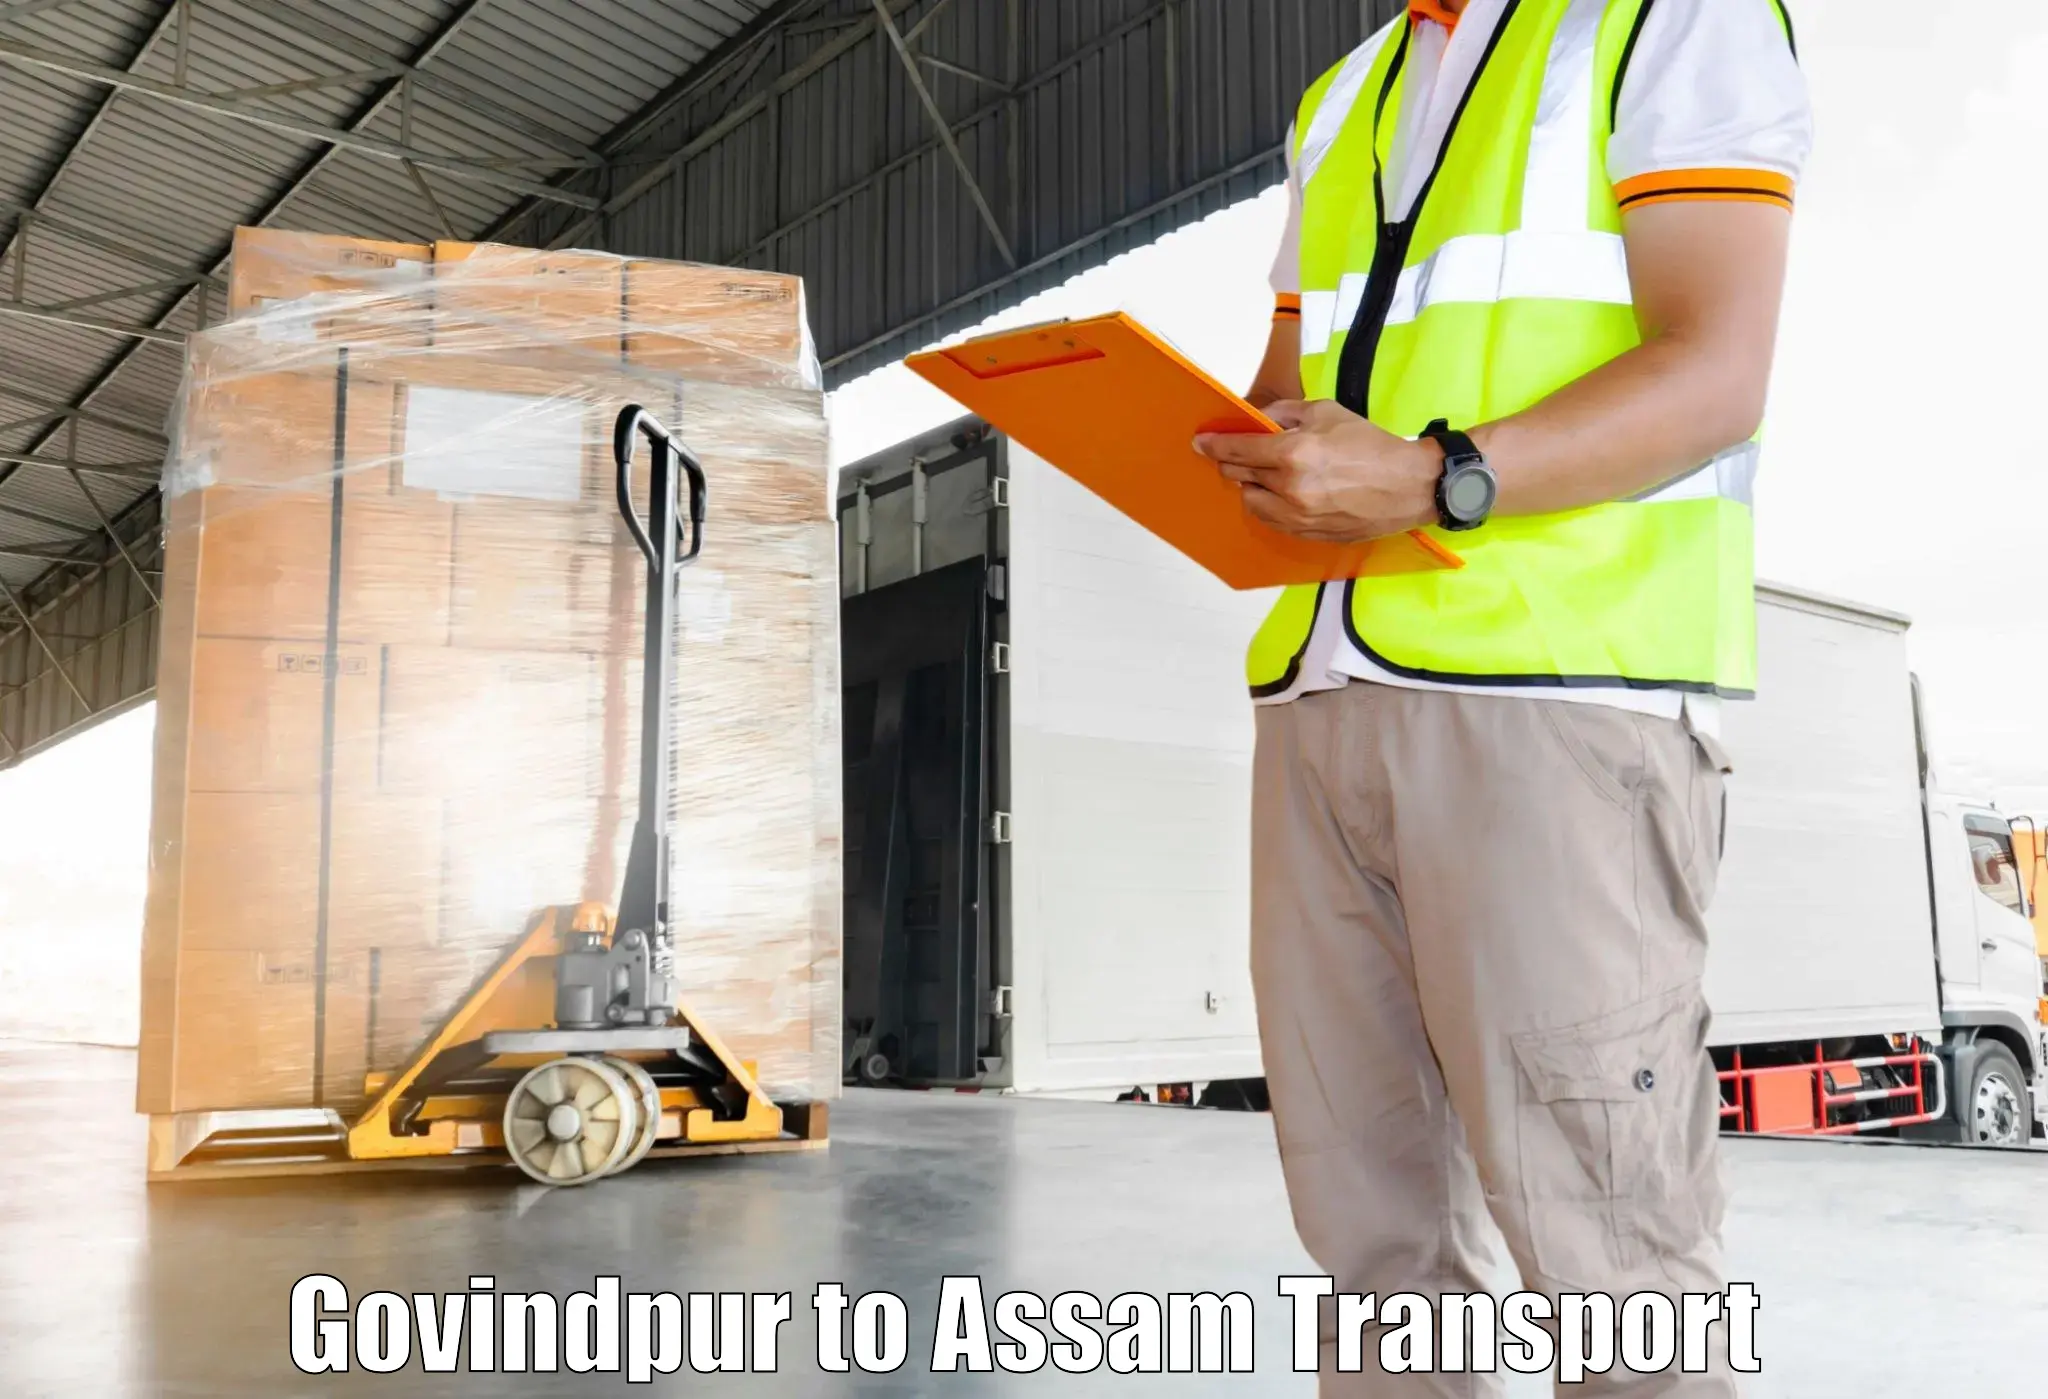 Transport bike from one state to another Govindpur to Guwahati University